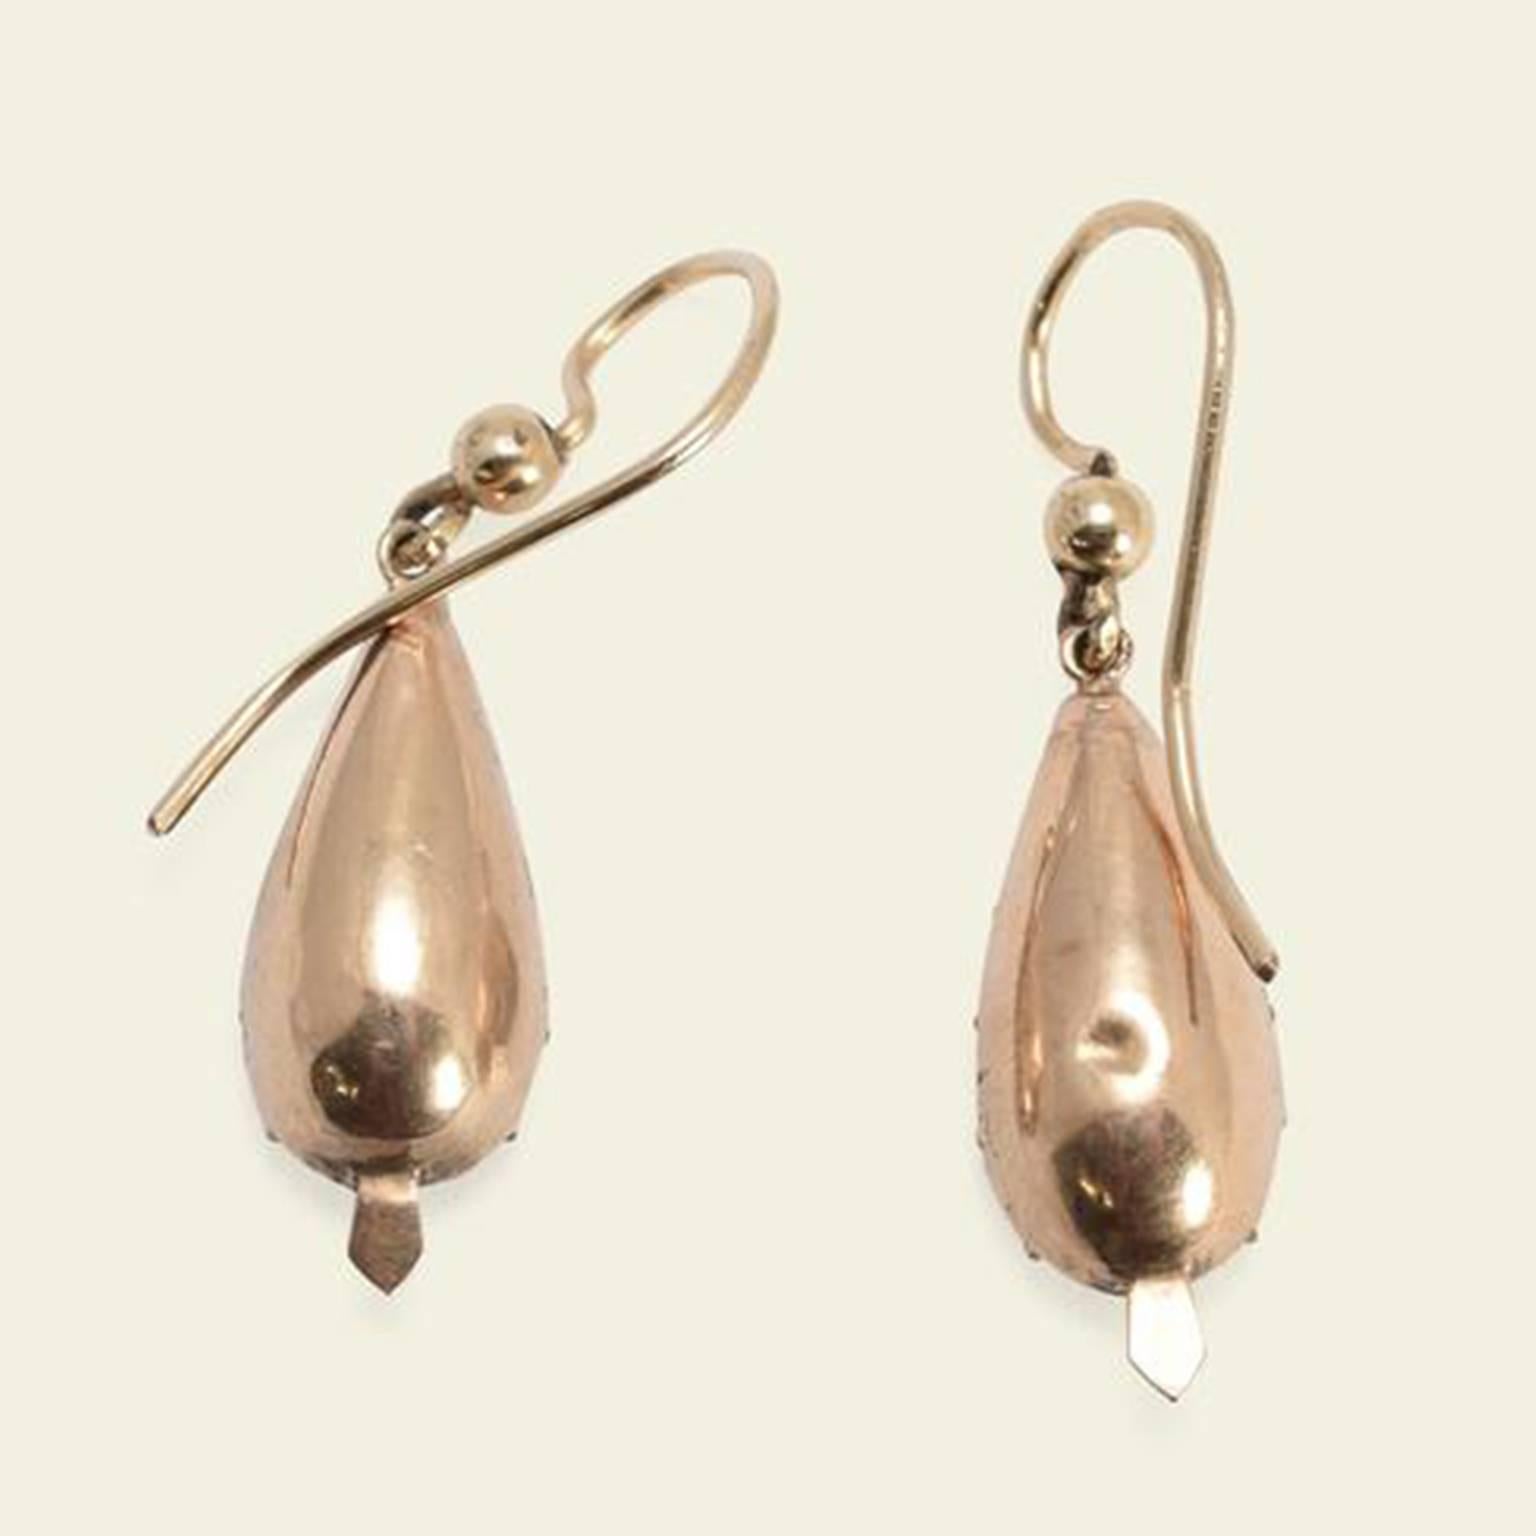 These magnificent Georgian earrings feature elongated pear-shaped citrines with red foil backs. The gemstones are mounted in 15k yellow gold dished settings with crimped edges and a decorative pointed tab at the base. Likely once part of a more